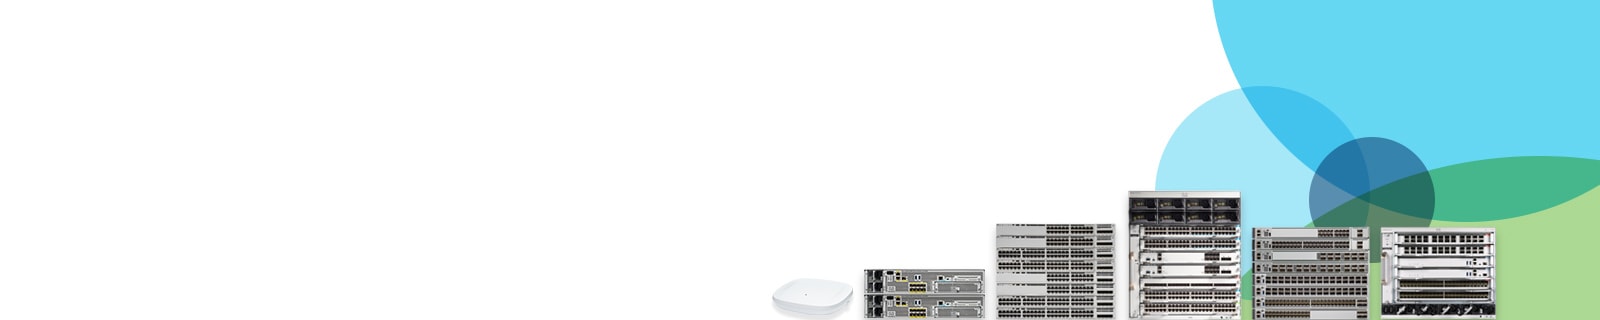 Cisco Catalyst 9000 Wireless and Switching Family